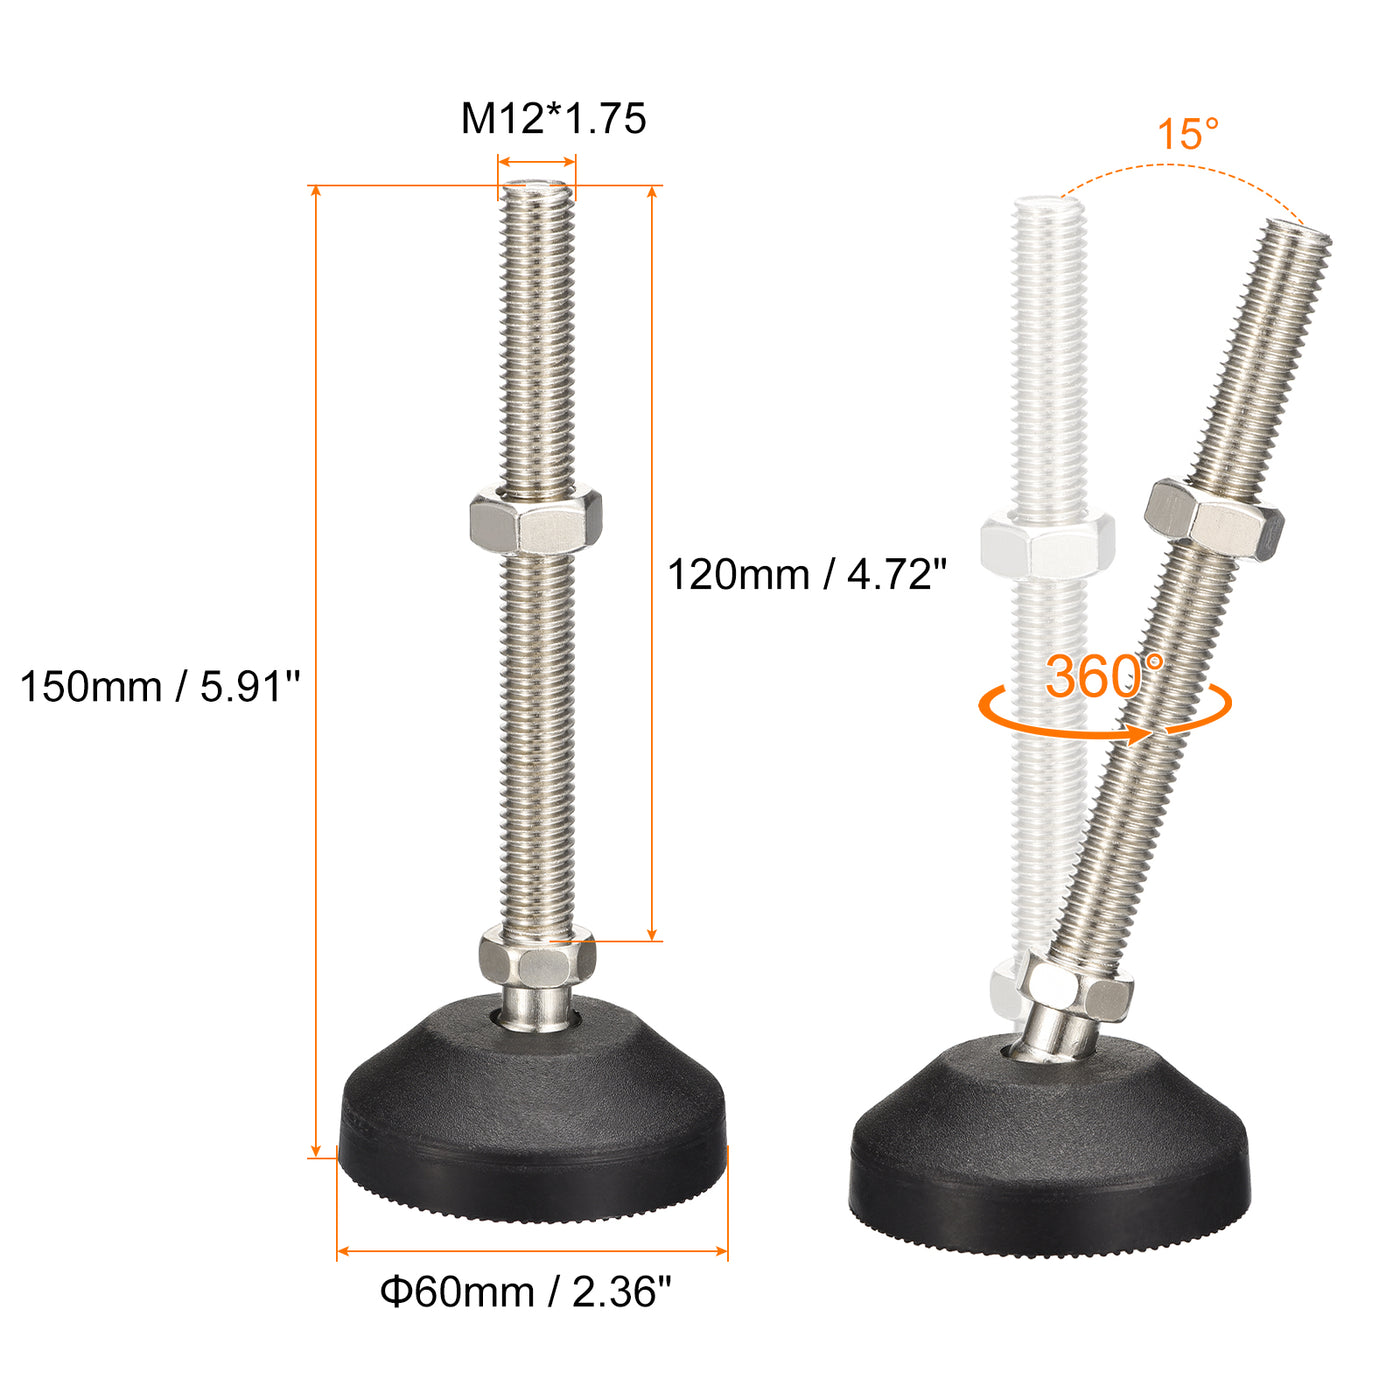 uxcell Uxcell Furniture Levelers, 1Pcs M12x120x60mm Nylon Universal Leveling Feet, Adjustable Swivel Table Feet for Furniture Workshop Machines Machinery Equipment